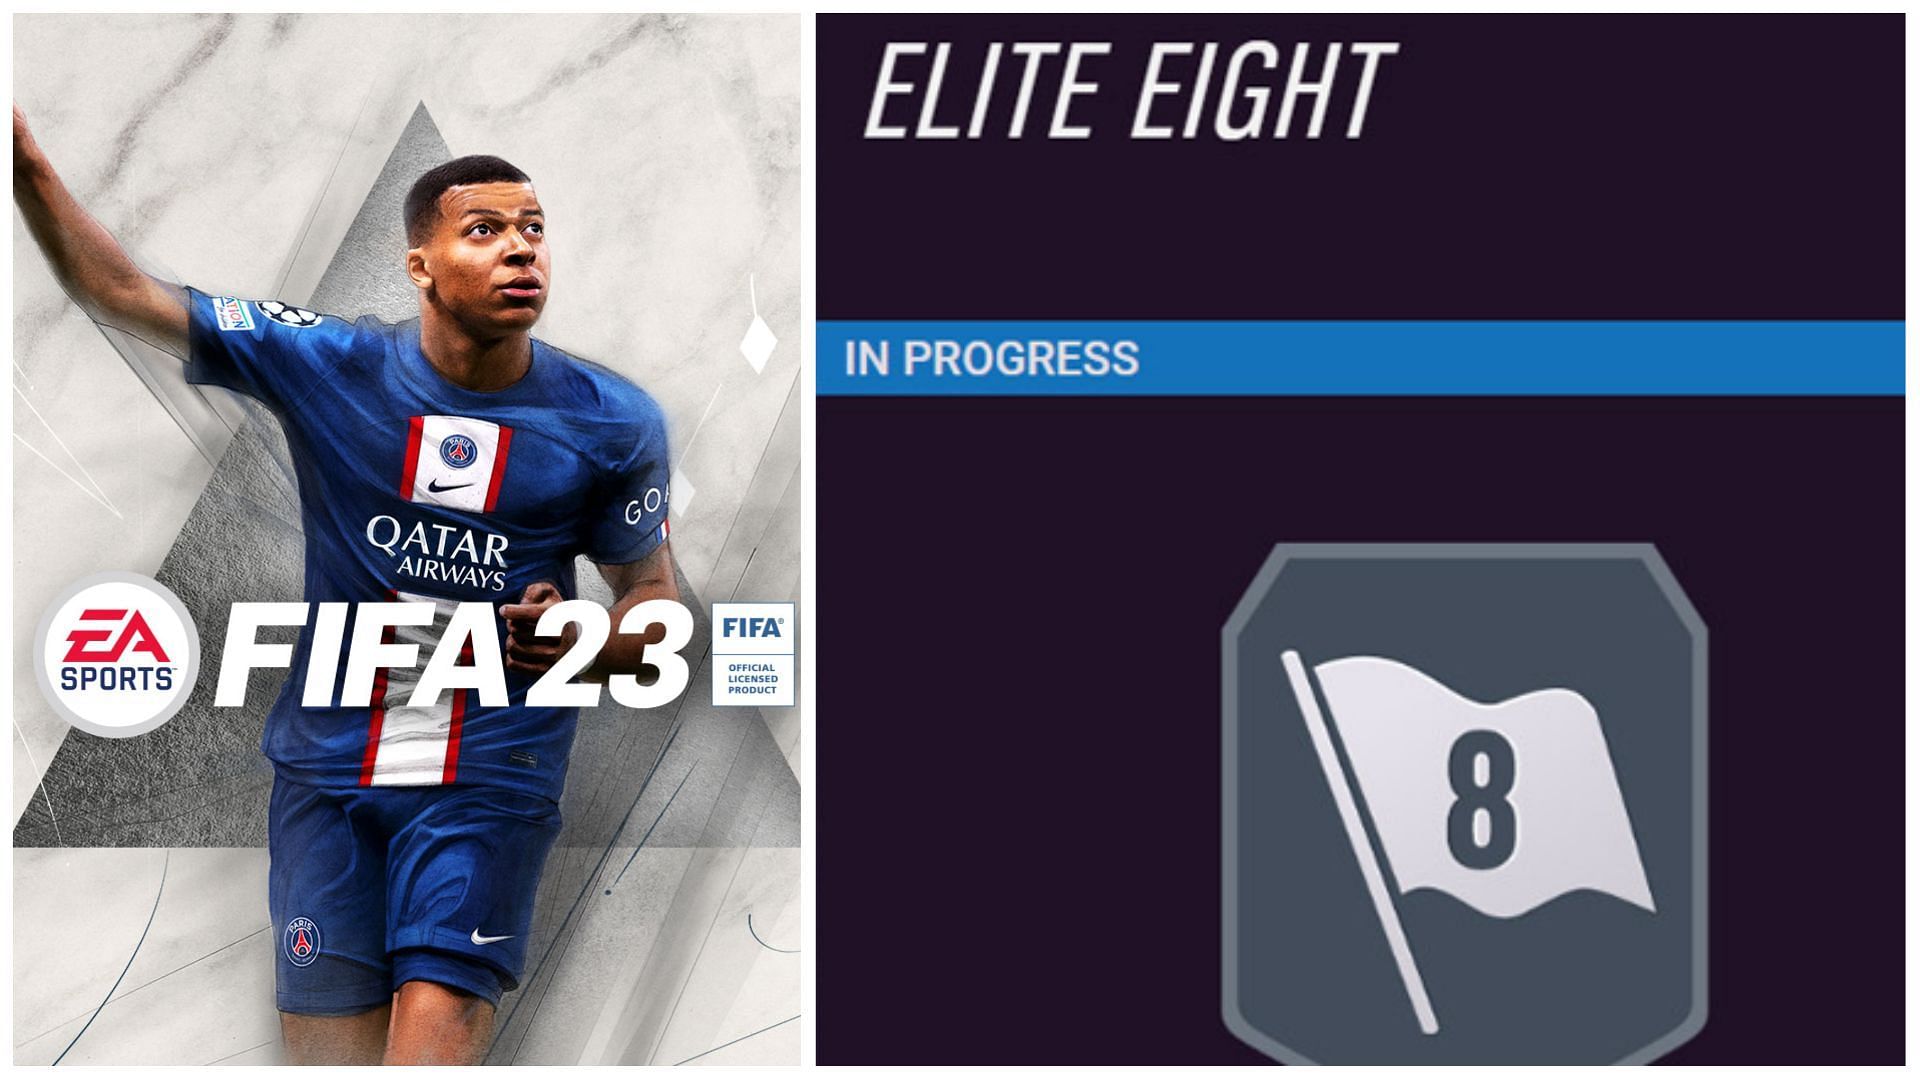 Elite Eight is a part of the Hybrid Nations SBC in FIFA 23 (Images via EA Sports)